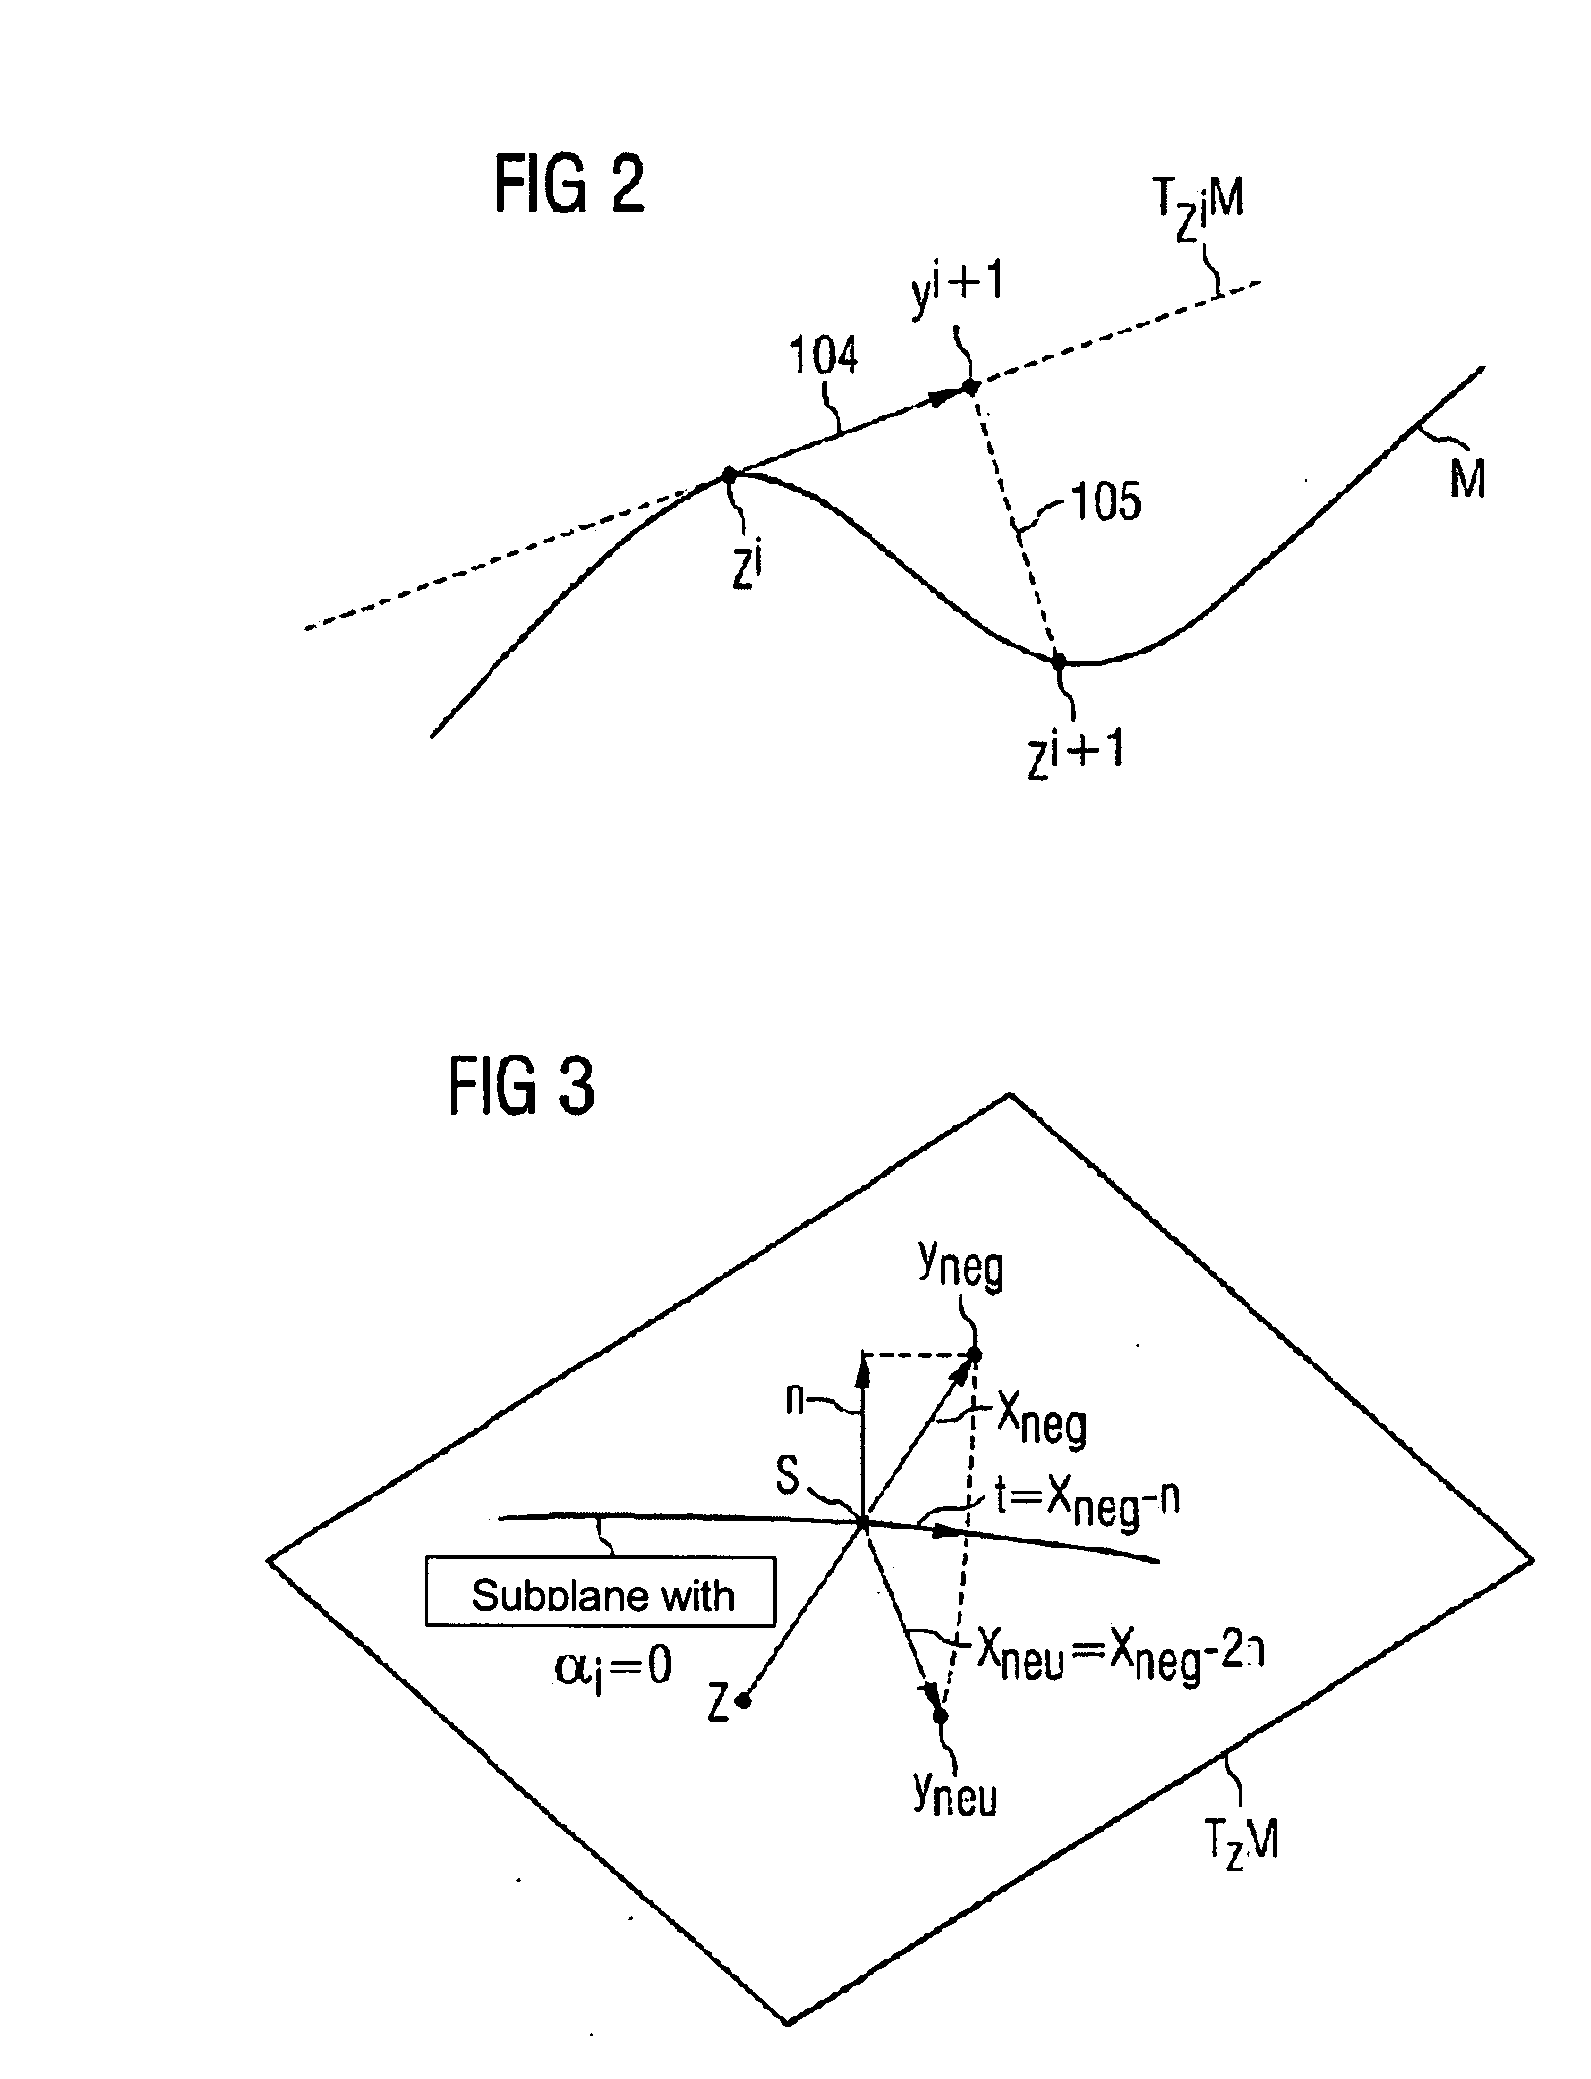 Method and arrangement for designing a technical system